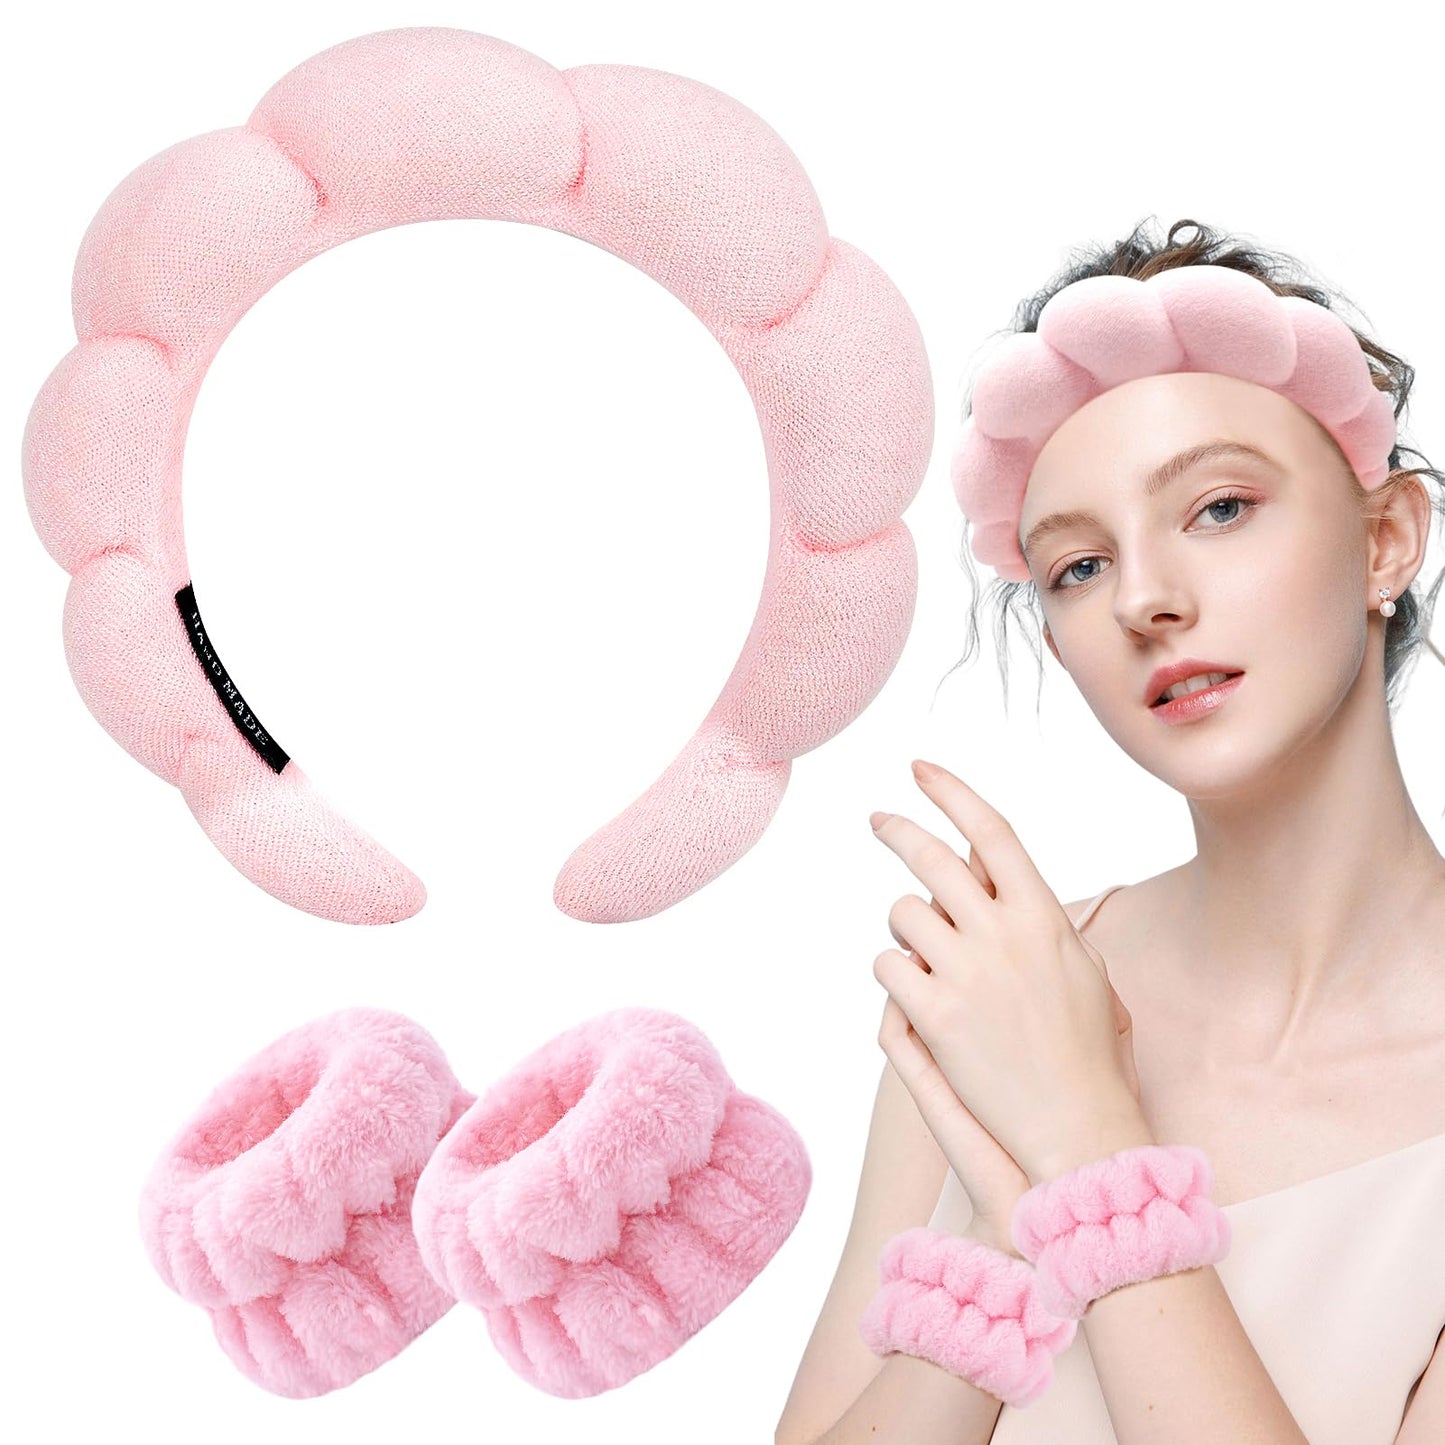 Zkptops Spa Headband for Washing Face Wristband Sponge Makeup Skincare Headband Terry Cloth Bubble Soft Get Ready Hairband for Women Girl Puffy Padded Headwear Non Slip Thick Hair Accessory(Pink)